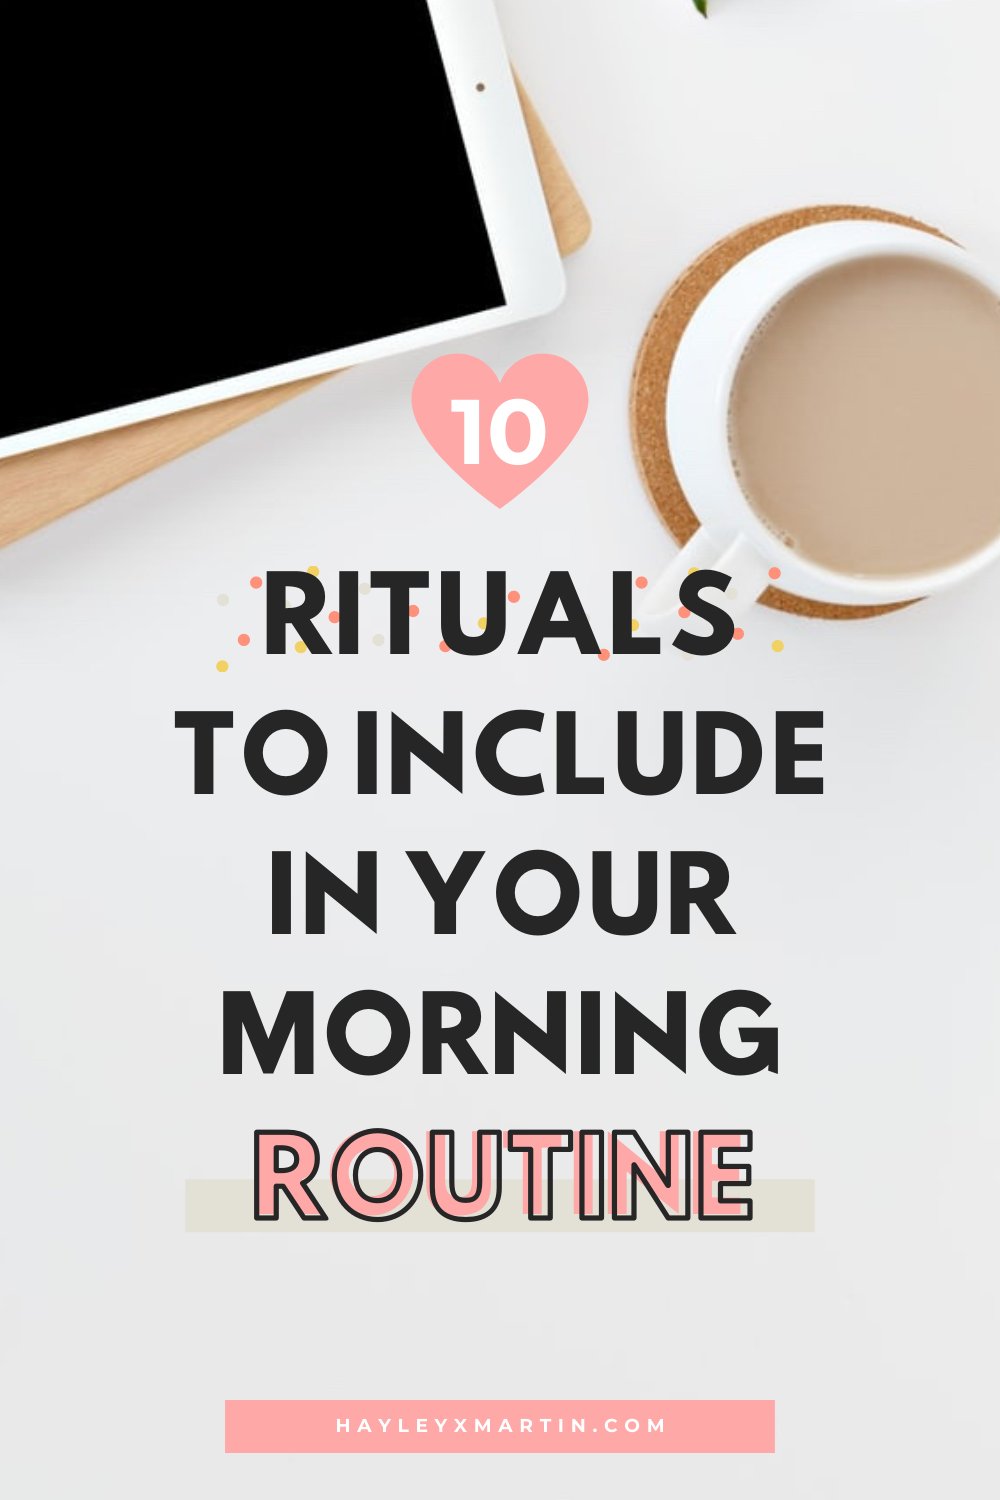 10 rituals to include in your morning routine | hayleyxmartin